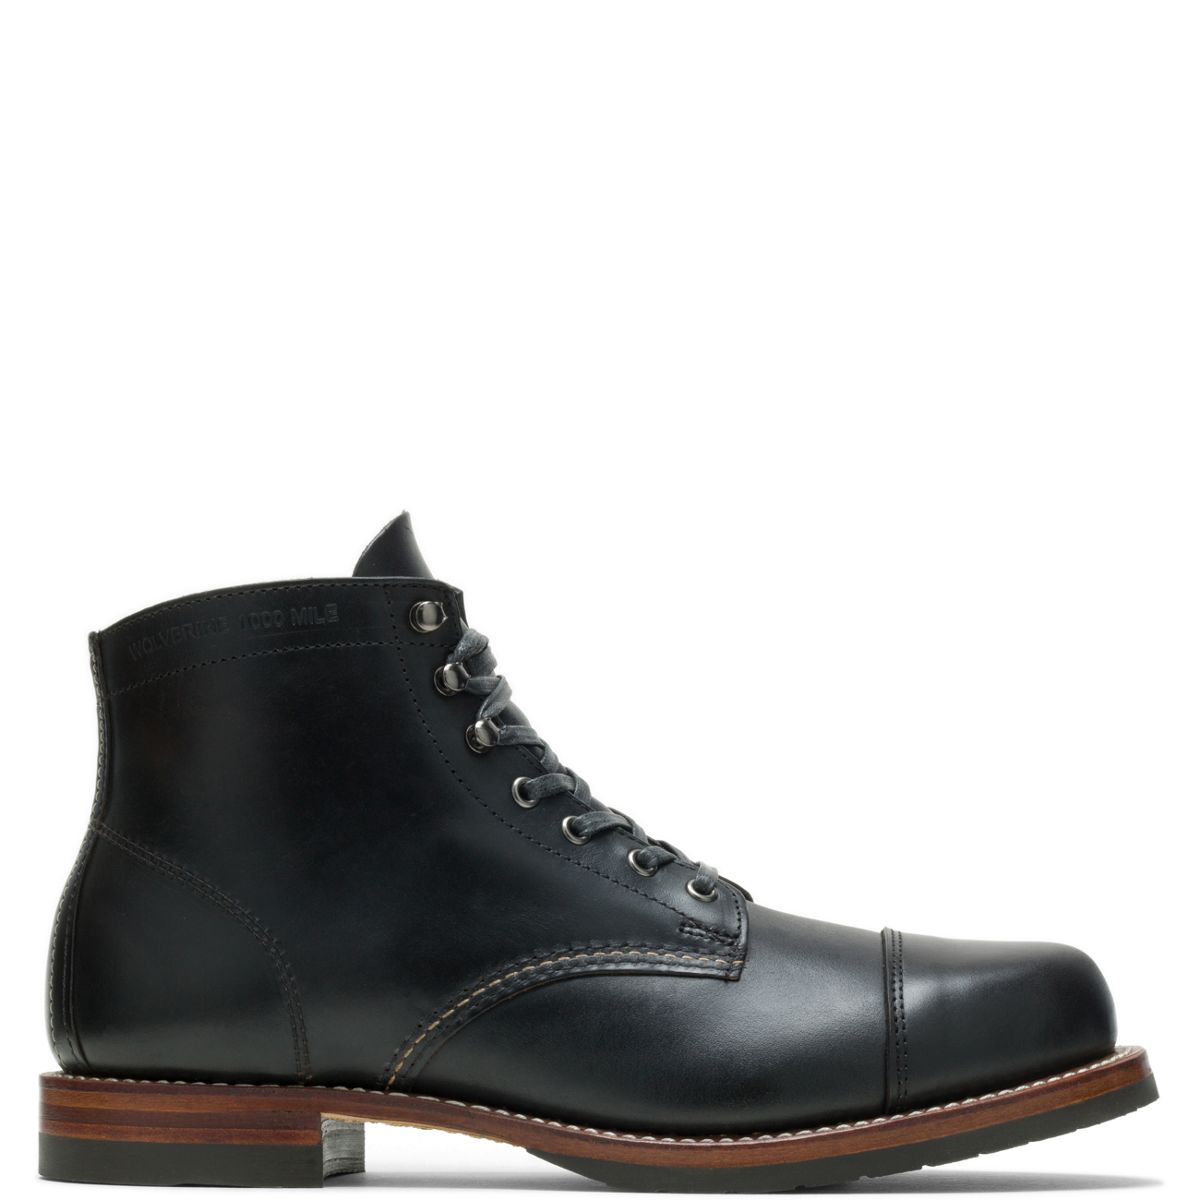 1000 Mile Cap-Toe Classic Boot - Work Boots | Wolverine Footwear